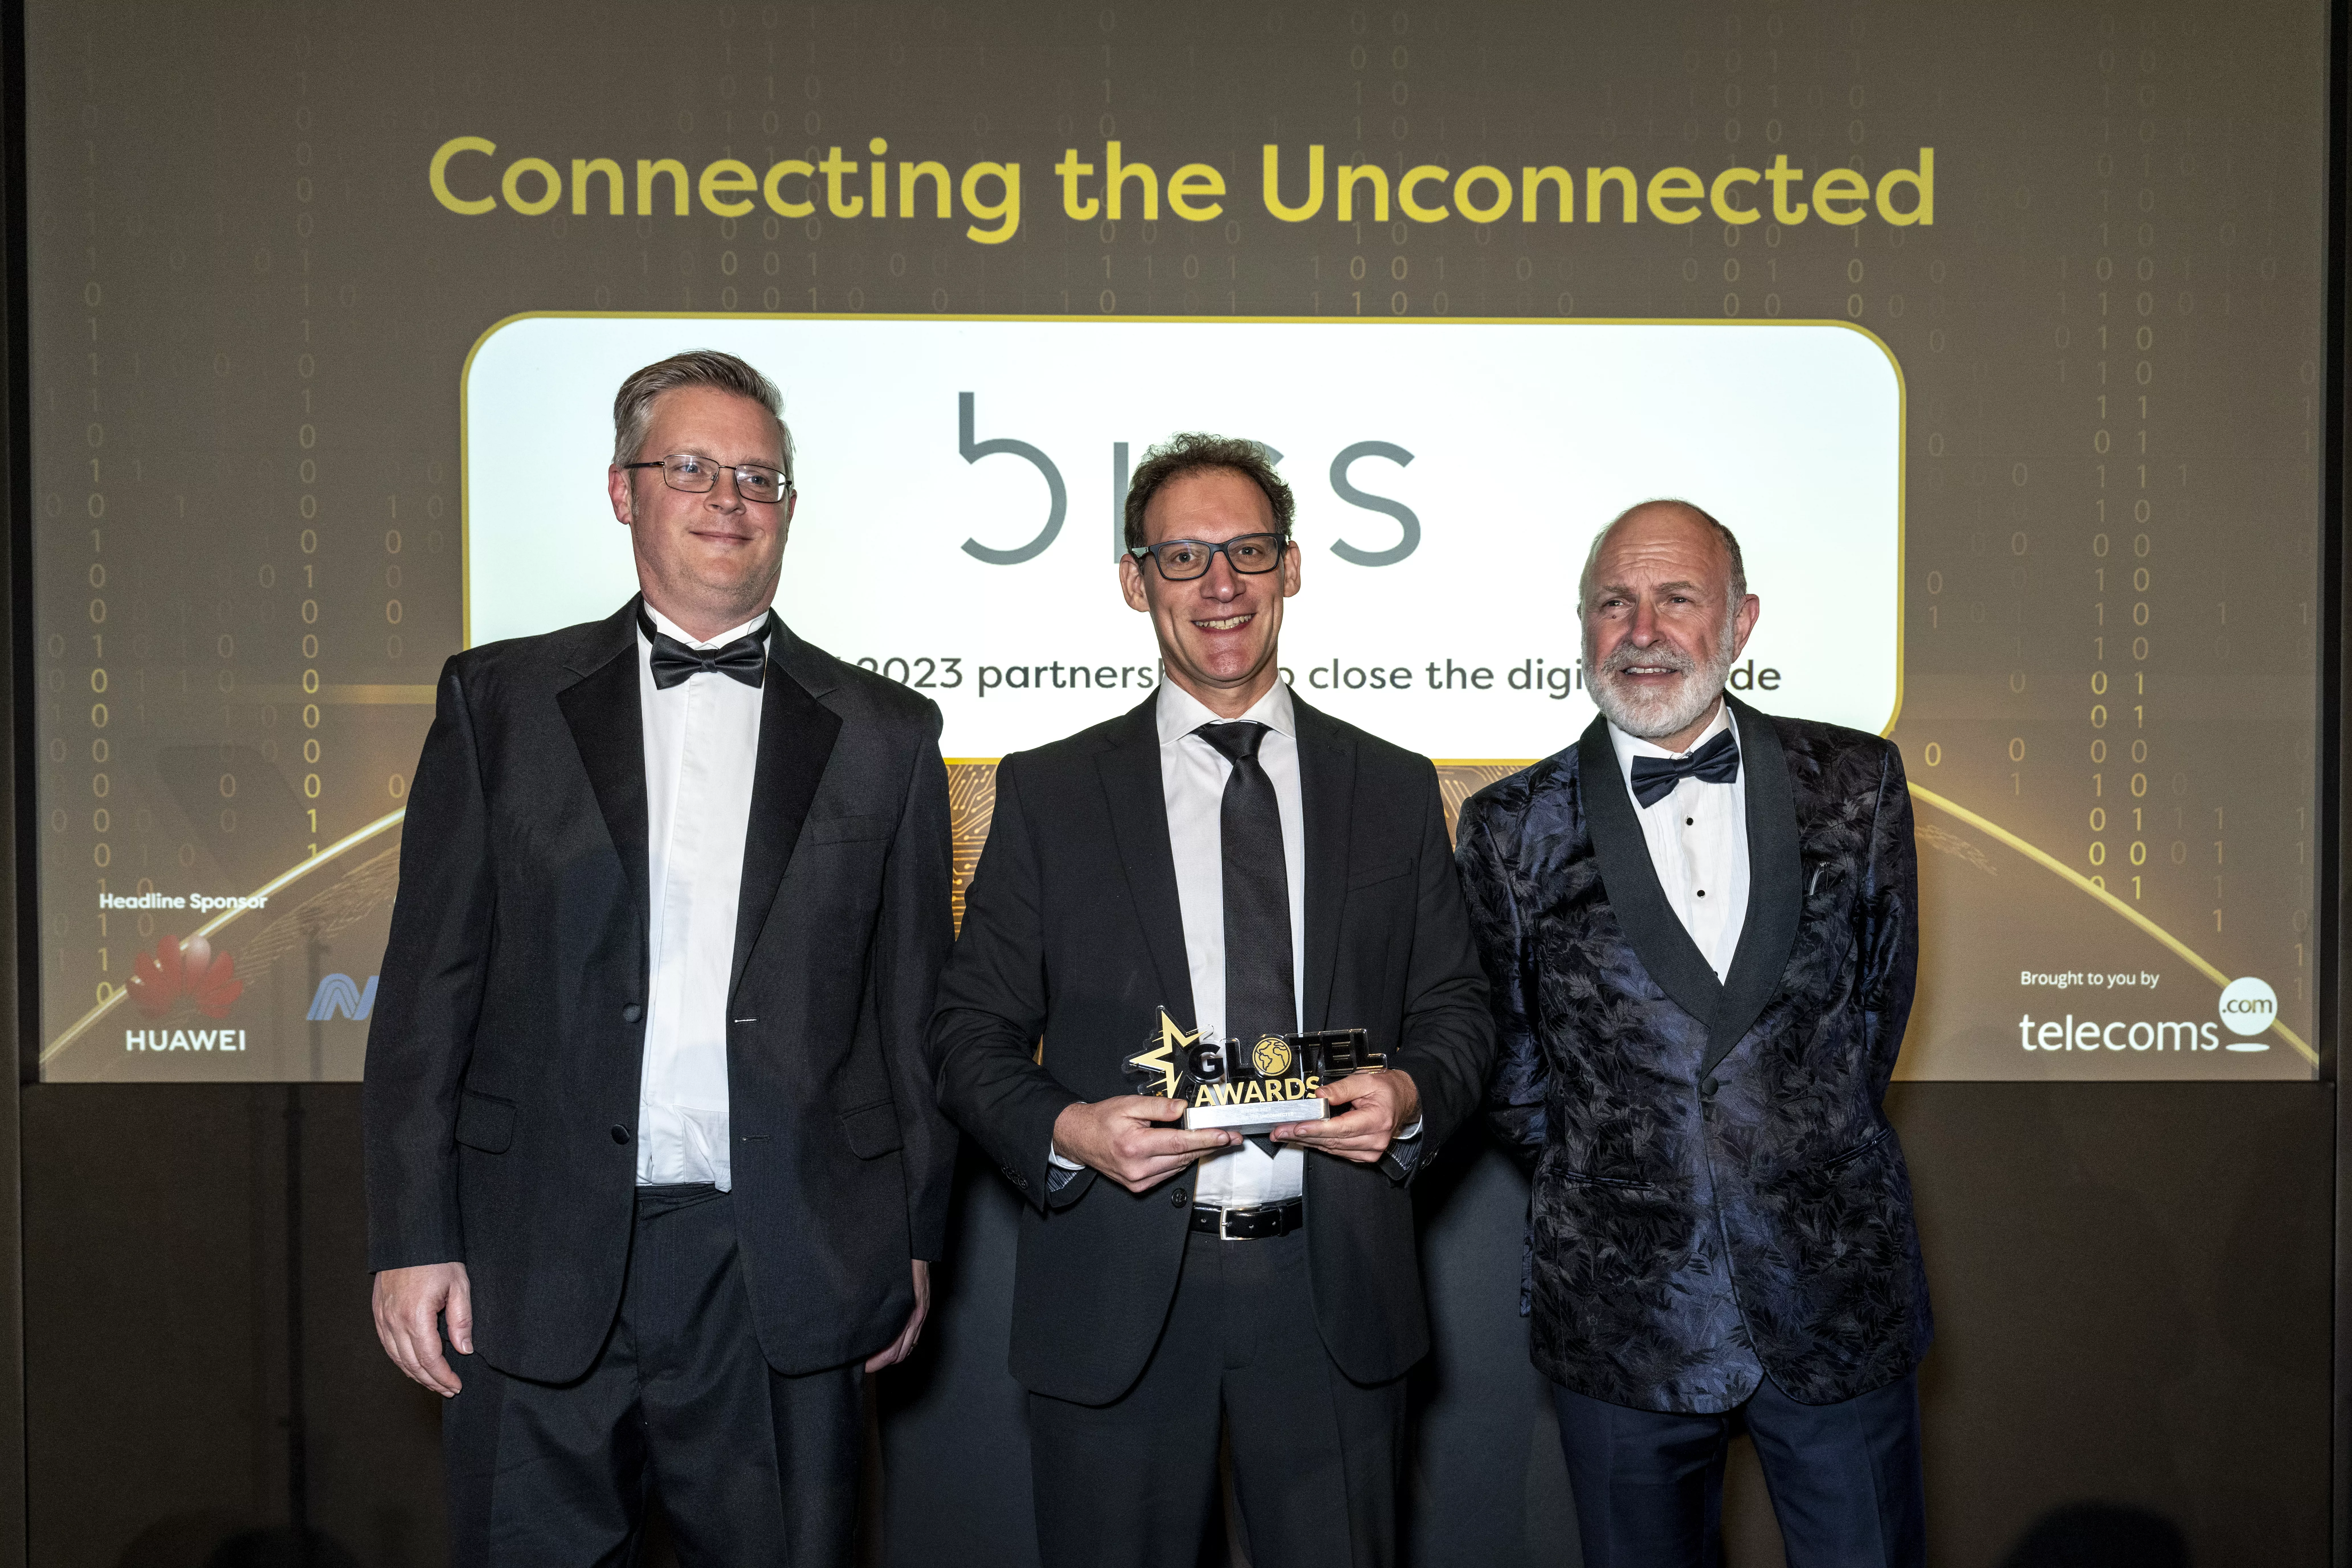 BICS wins 2023 Glotel for “Connecting the Unconnected”